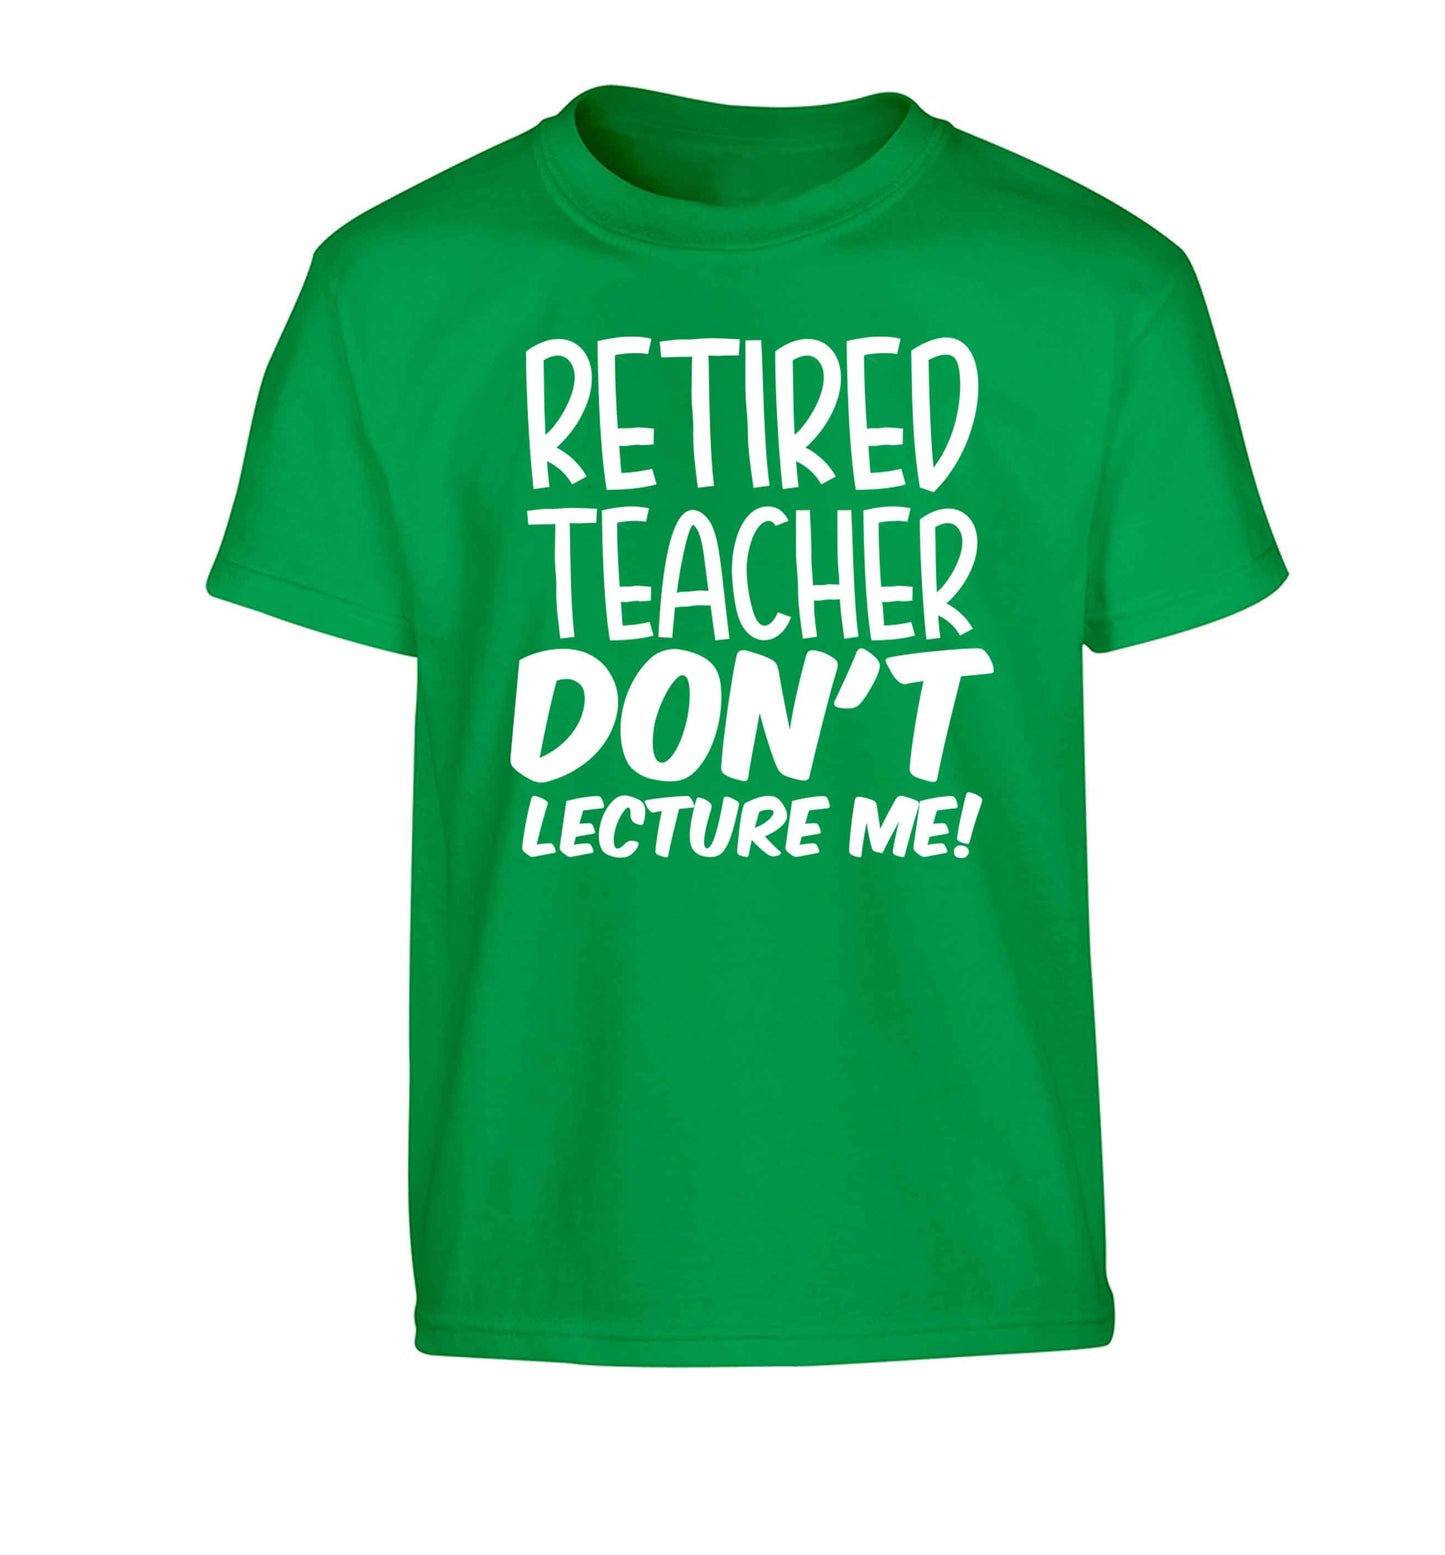 Retired teacher don't lecture me! Children's green Tshirt 12-13 Years